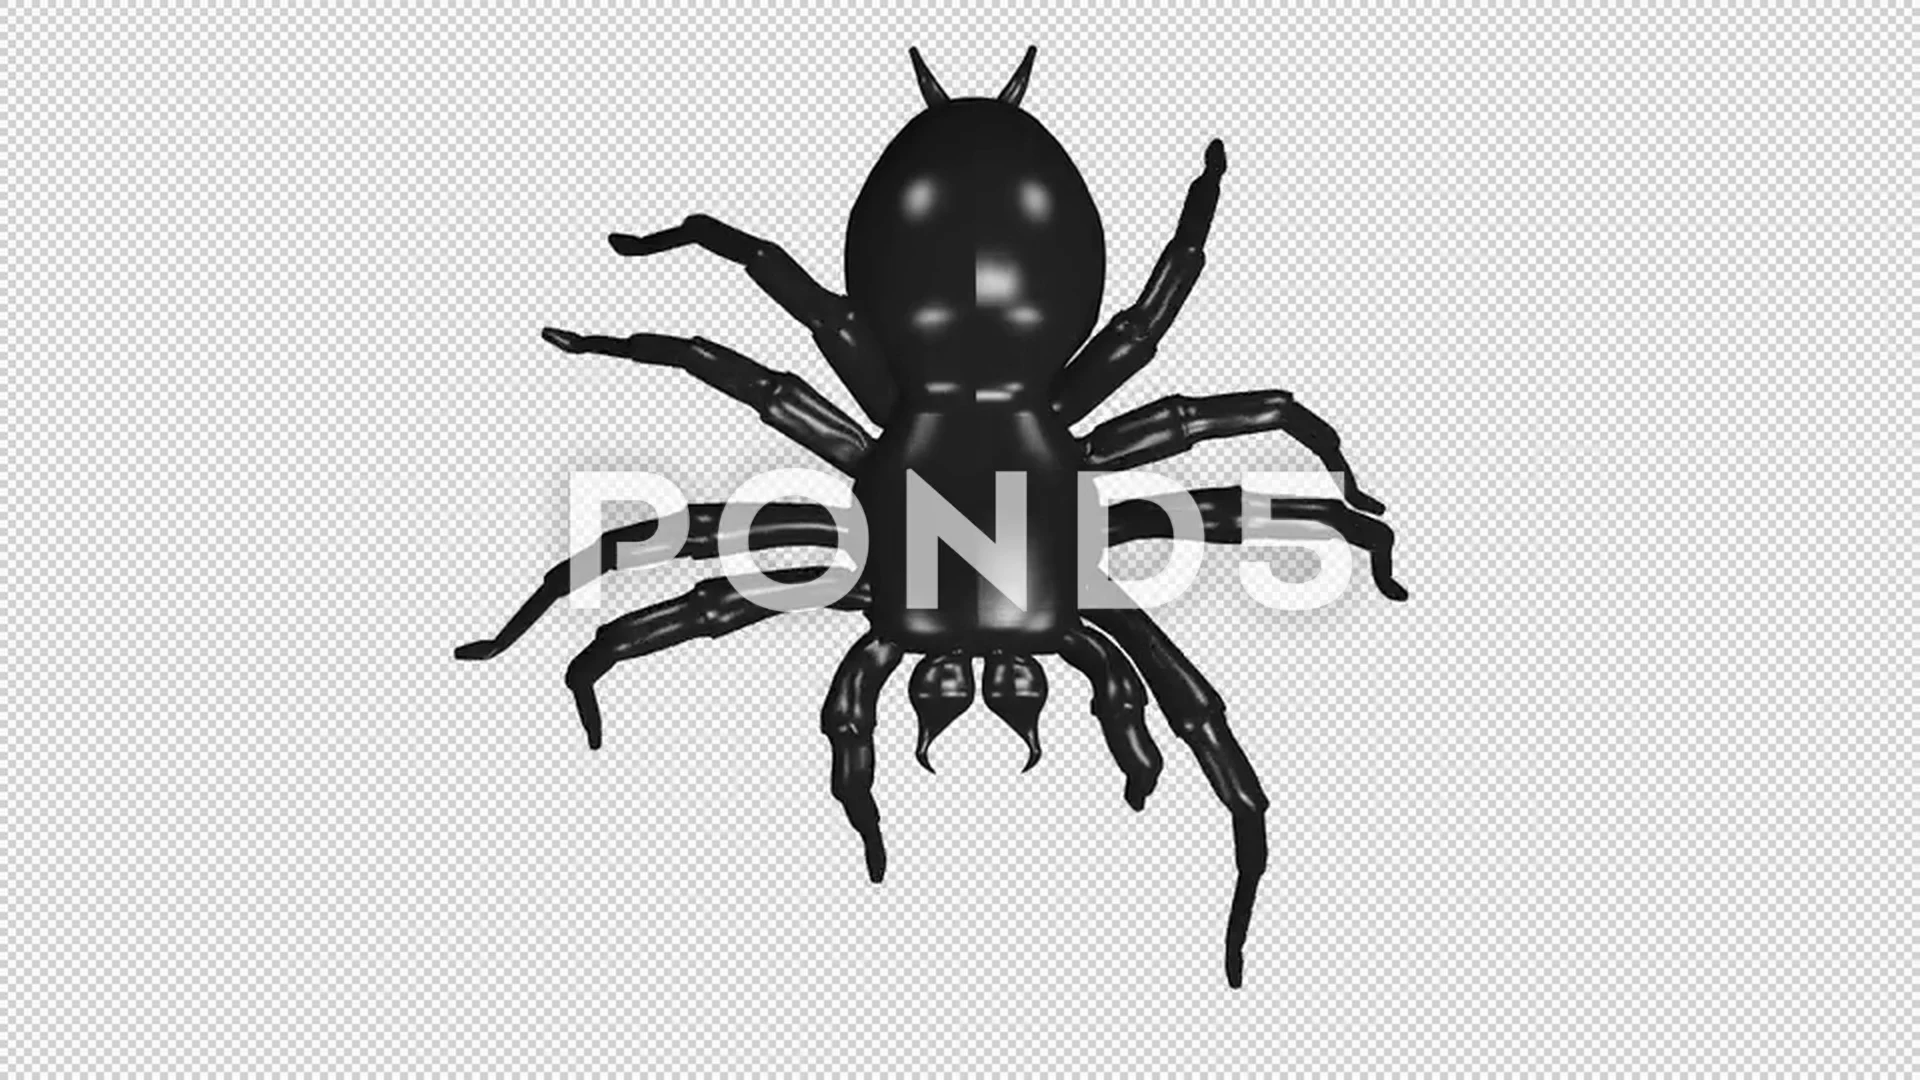 animated spider silhouette wallpaper